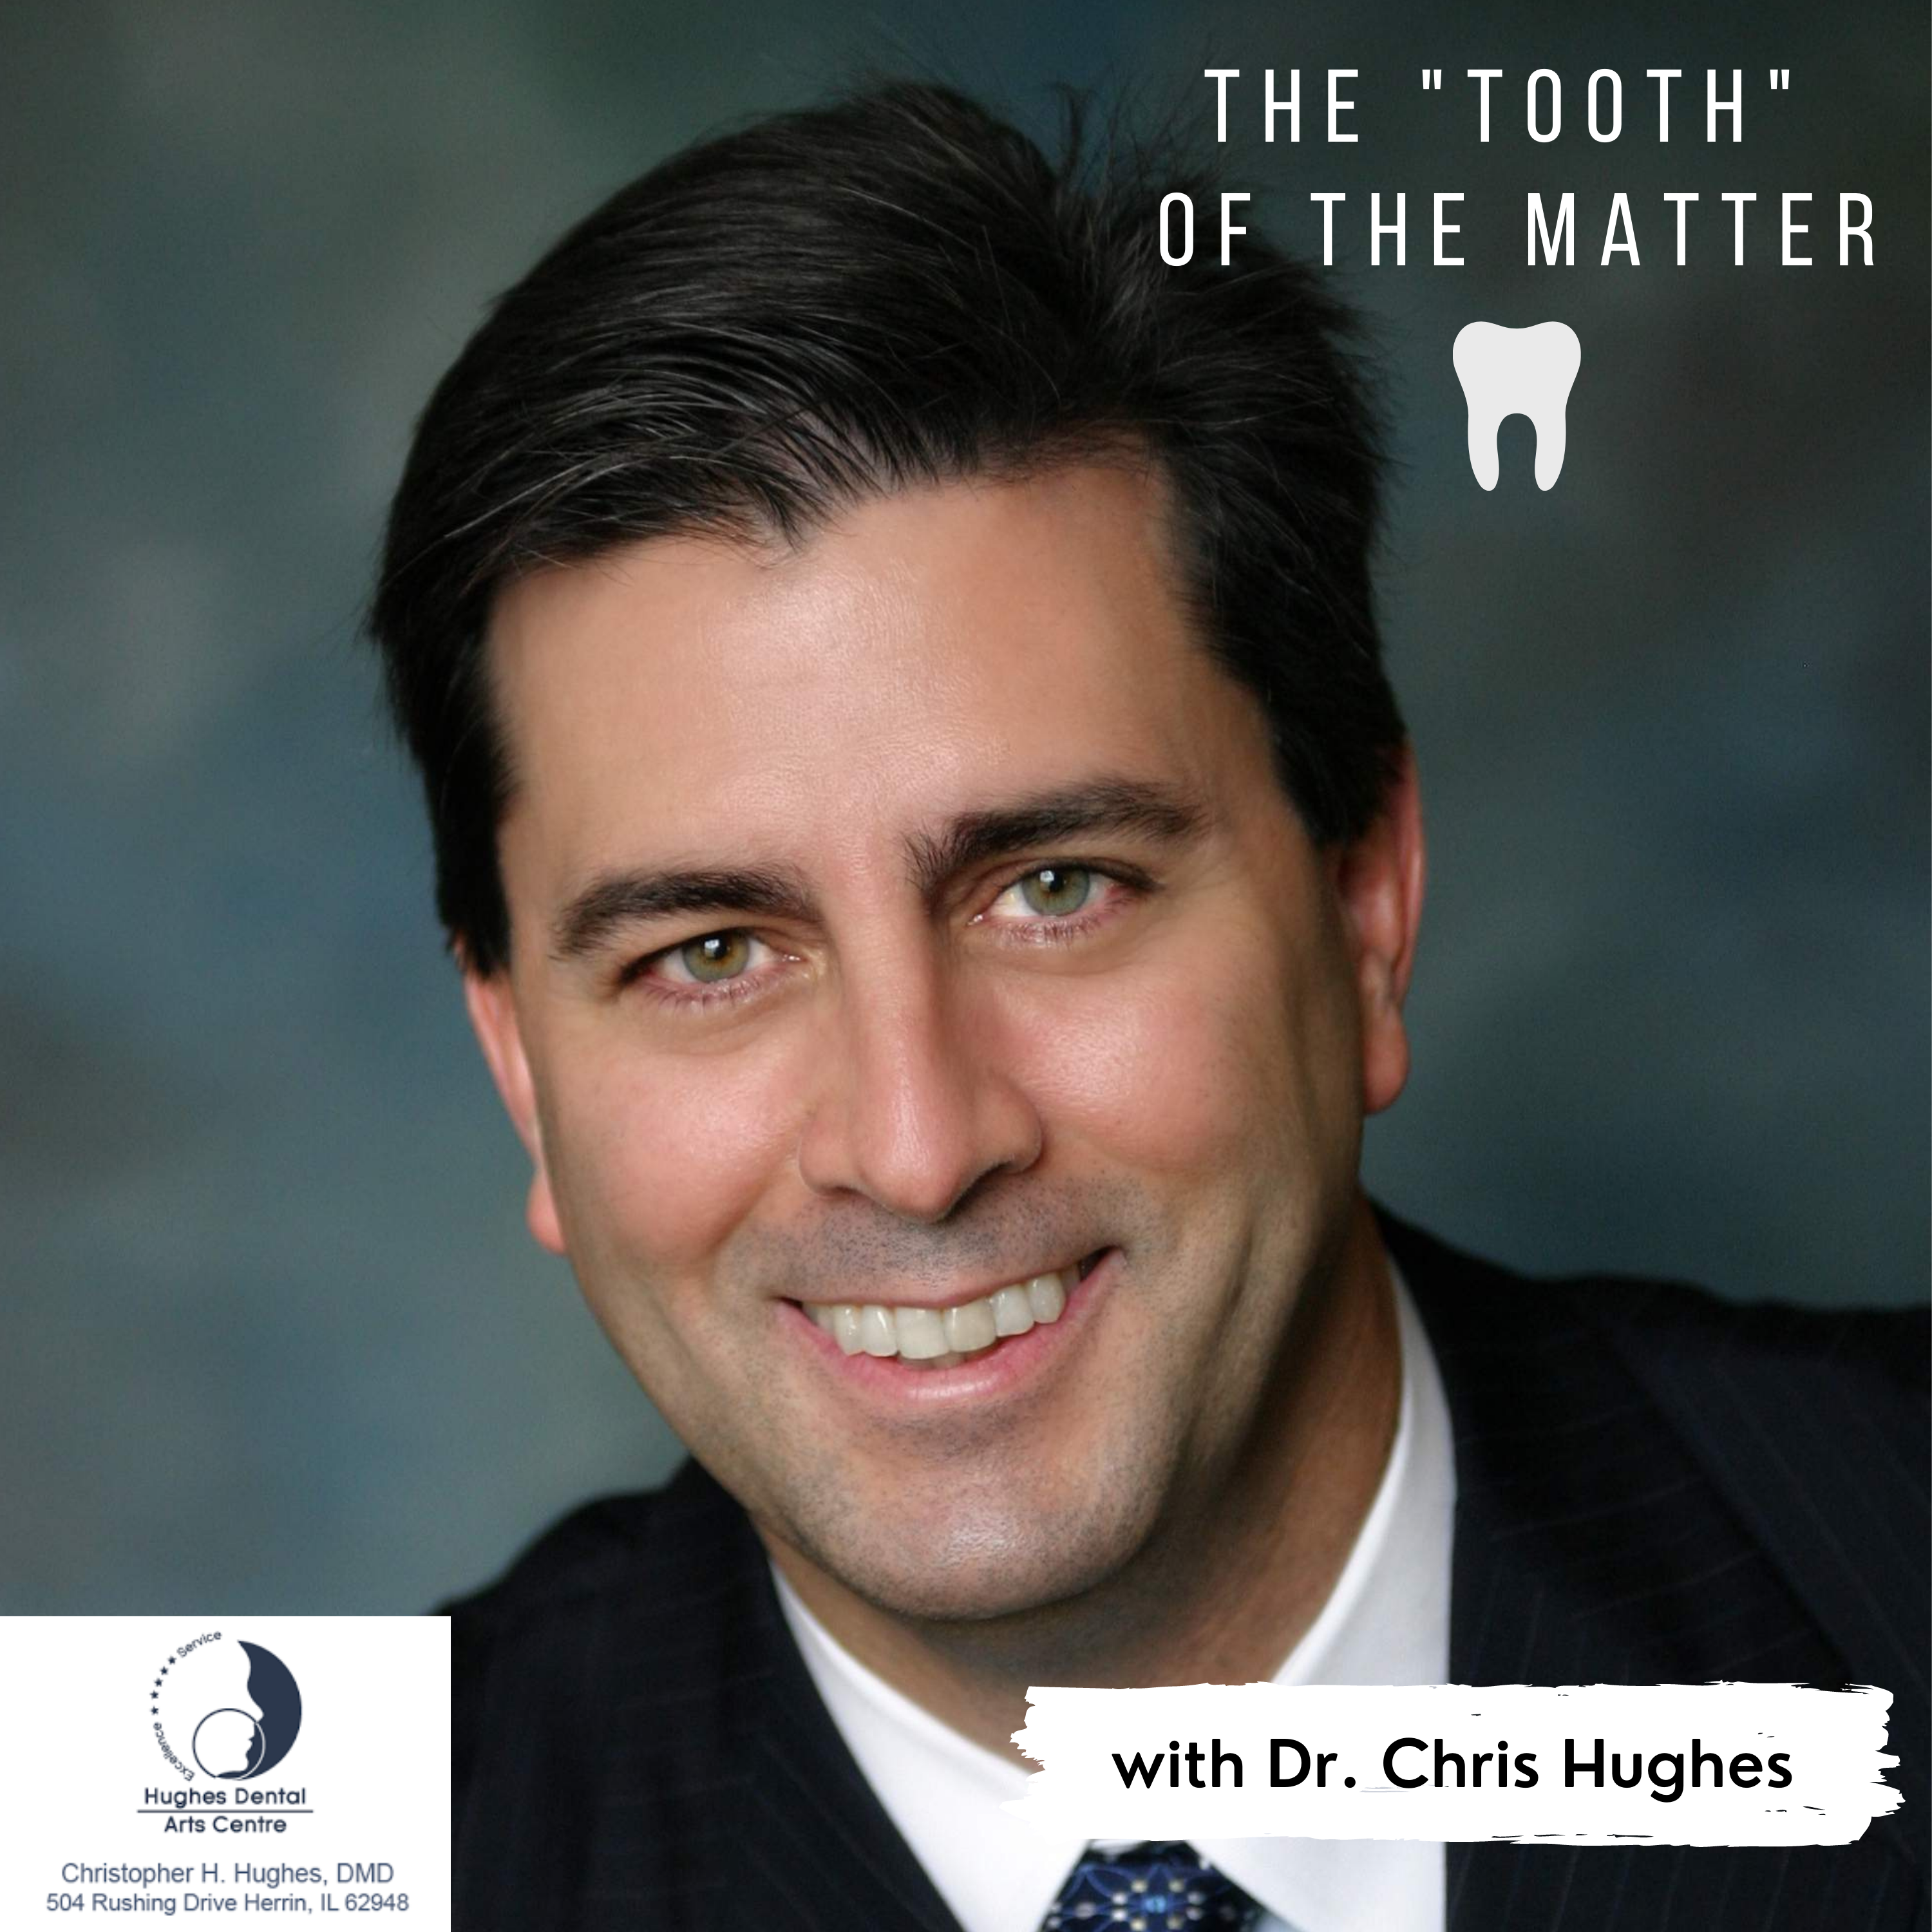 The "Tooth" of the Matter, with Dr. Chris Hughes